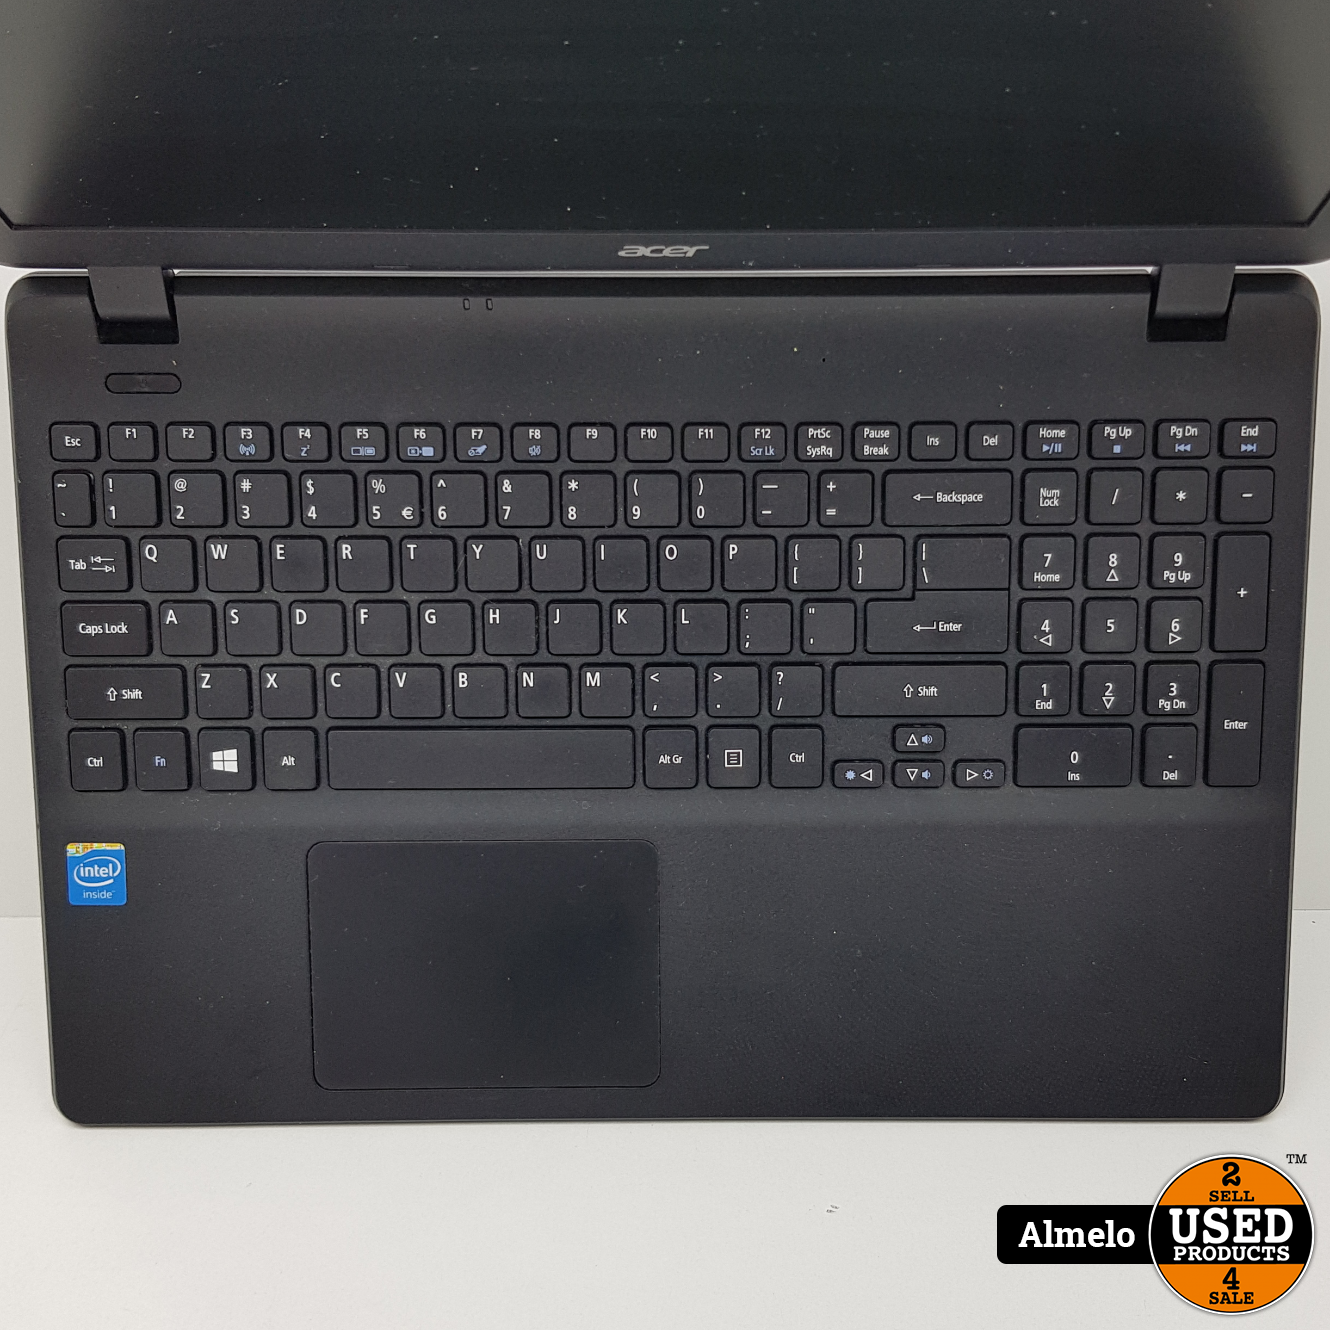 Nacht tafereel afschaffen acer Acer ES1-512 Laptop - Used Products Almelo